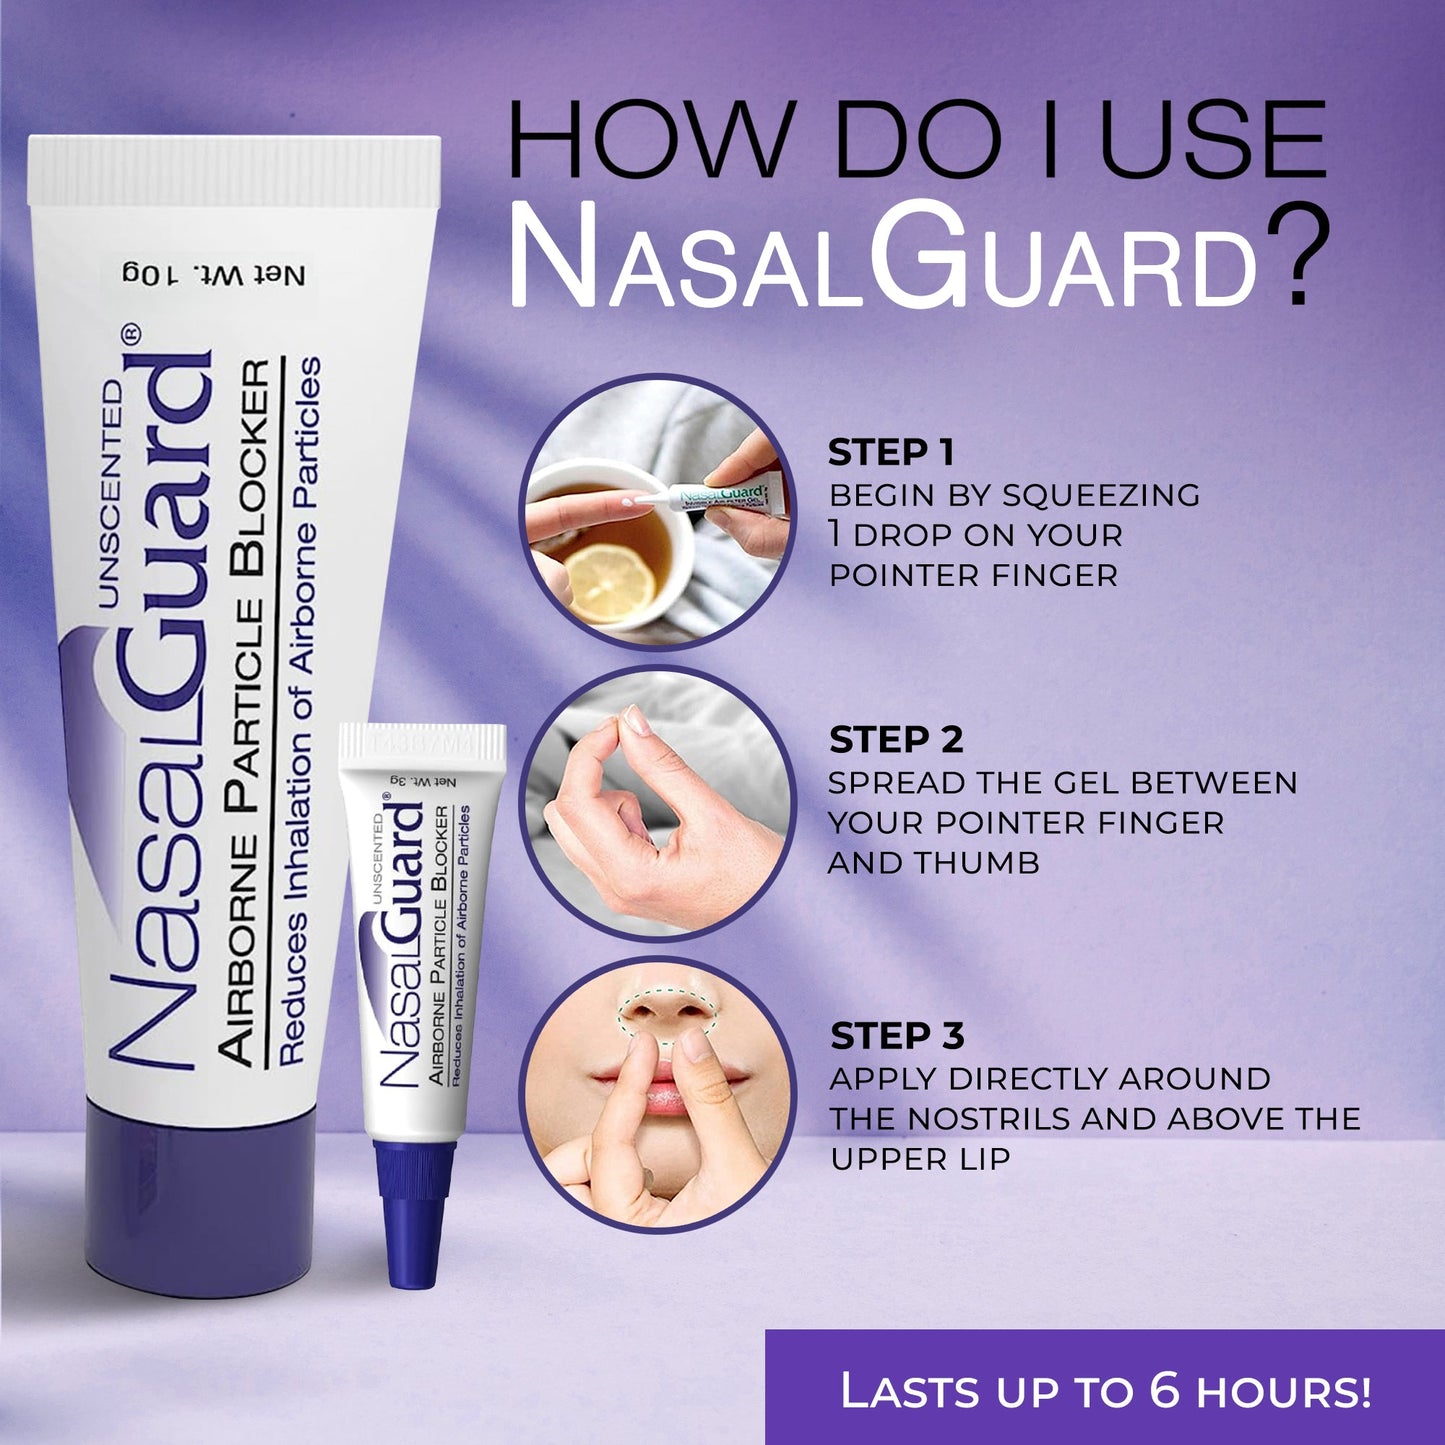 NasalGuard For Air Travelers - Airborne Particle Blocker, Unscented - 10g (Pack of 6)